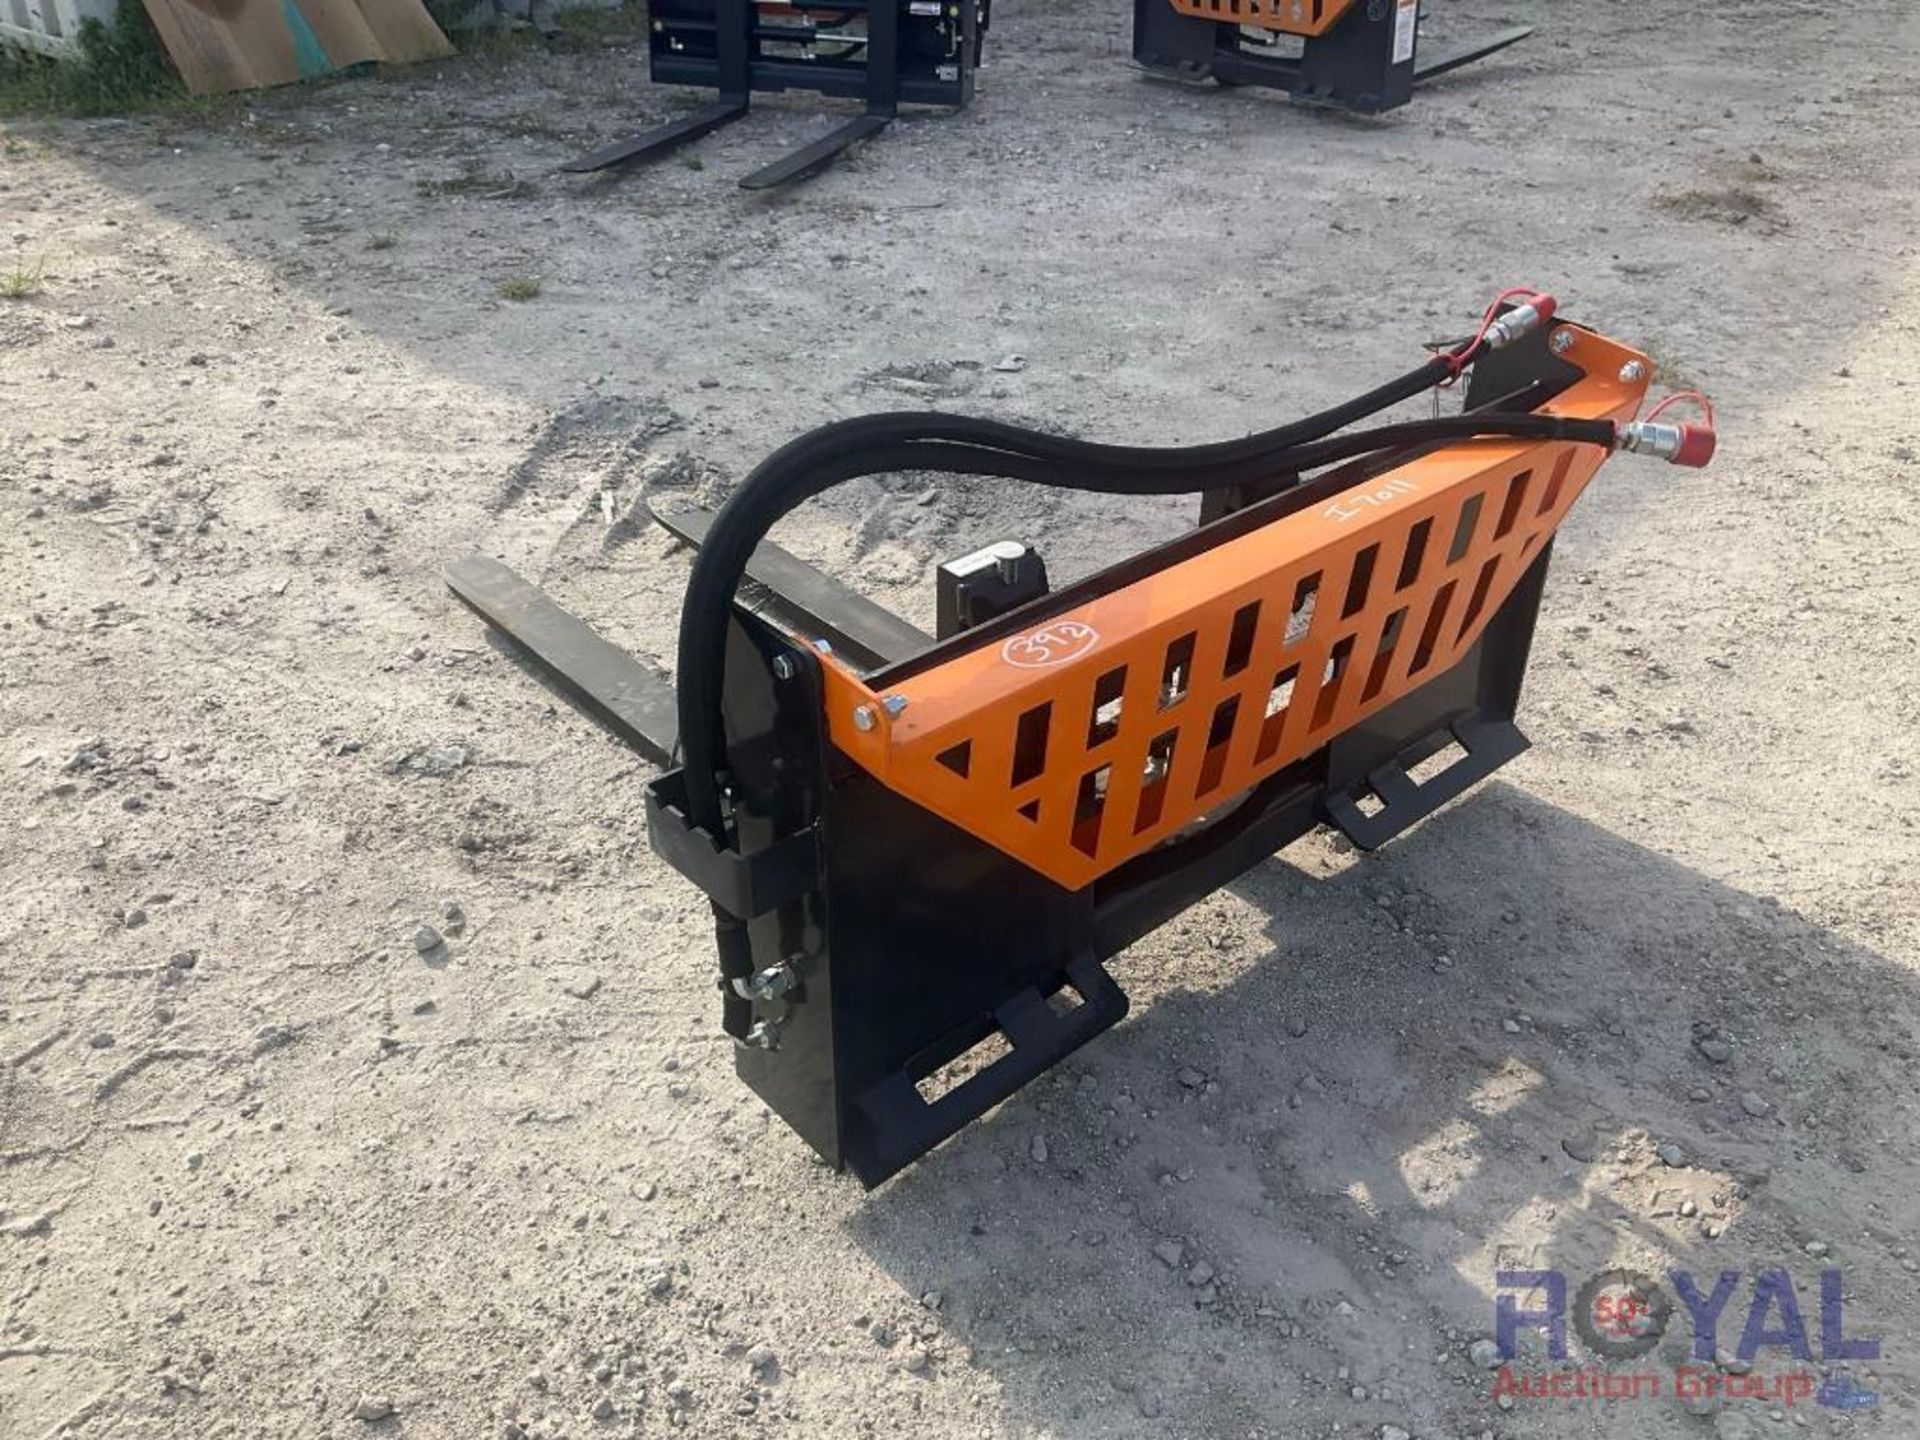 2023 Wolverine PFA-11-3300G 3500lbs Hydraulic Forks Skid Steer Attachment - Image 2 of 5